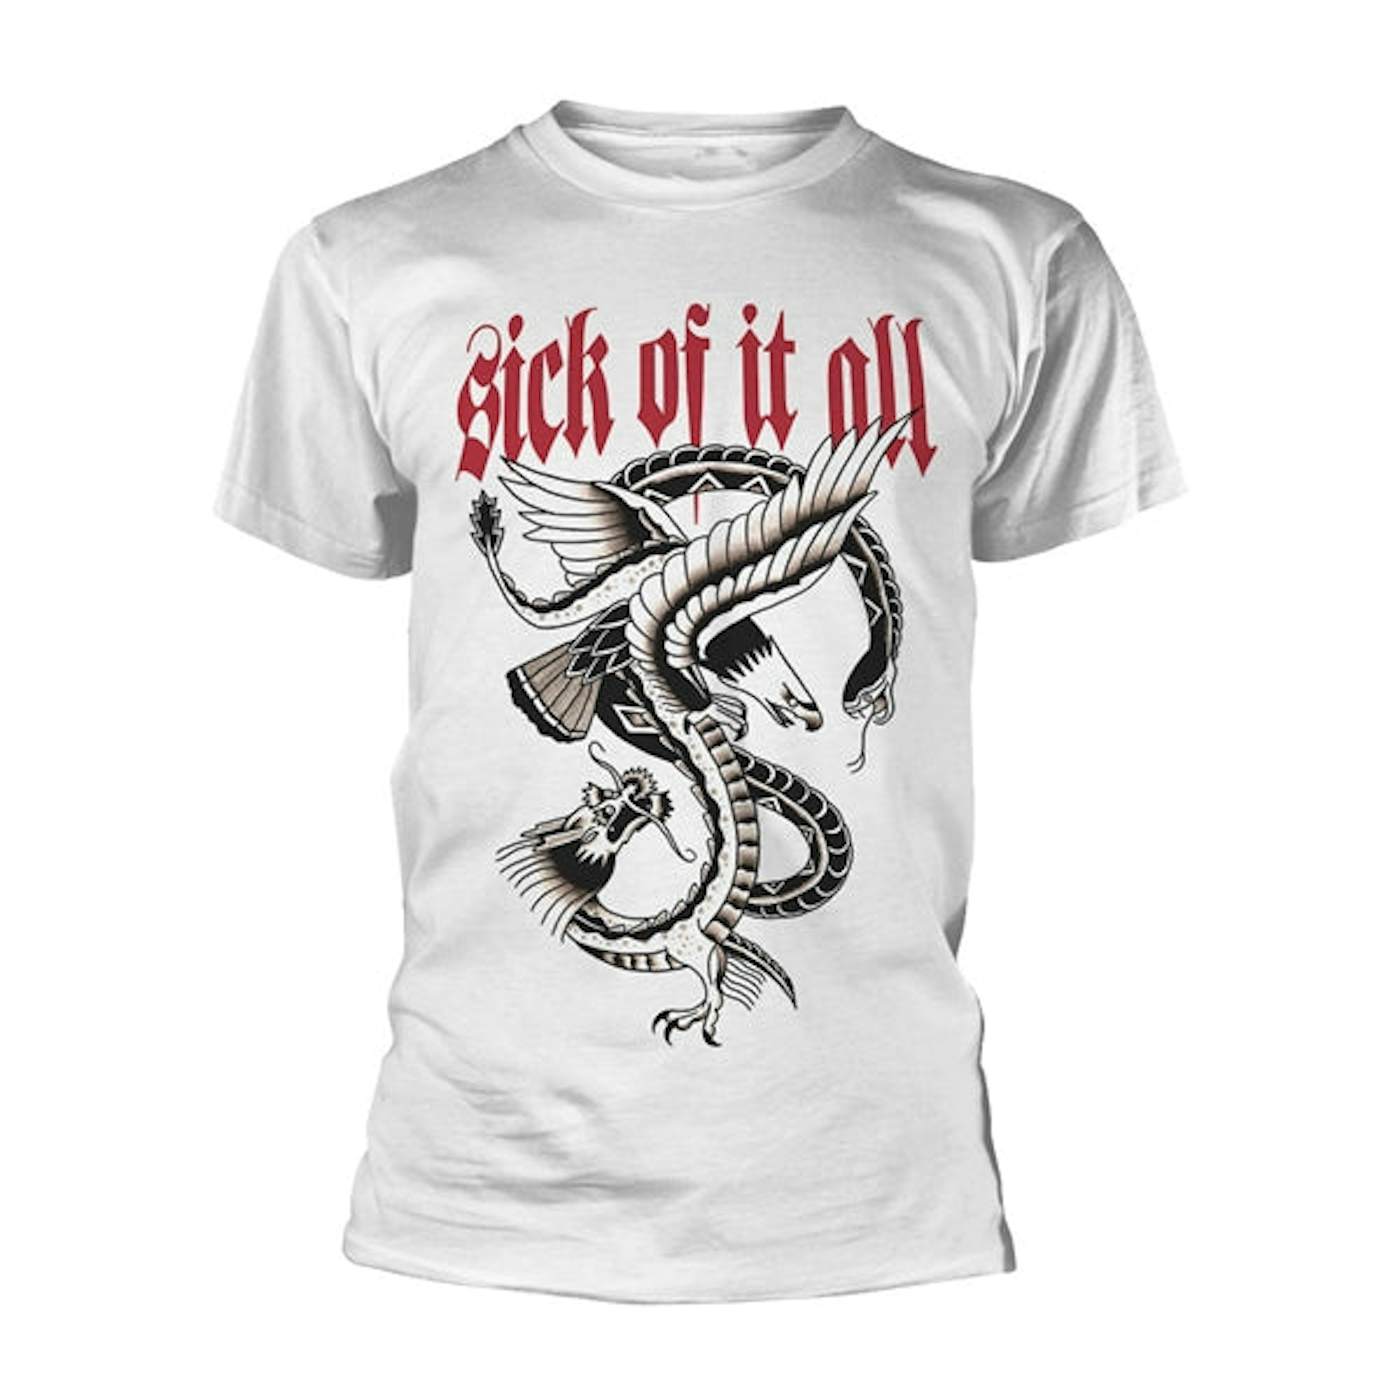 Sick Of It All T Shirt - Eagle (White)